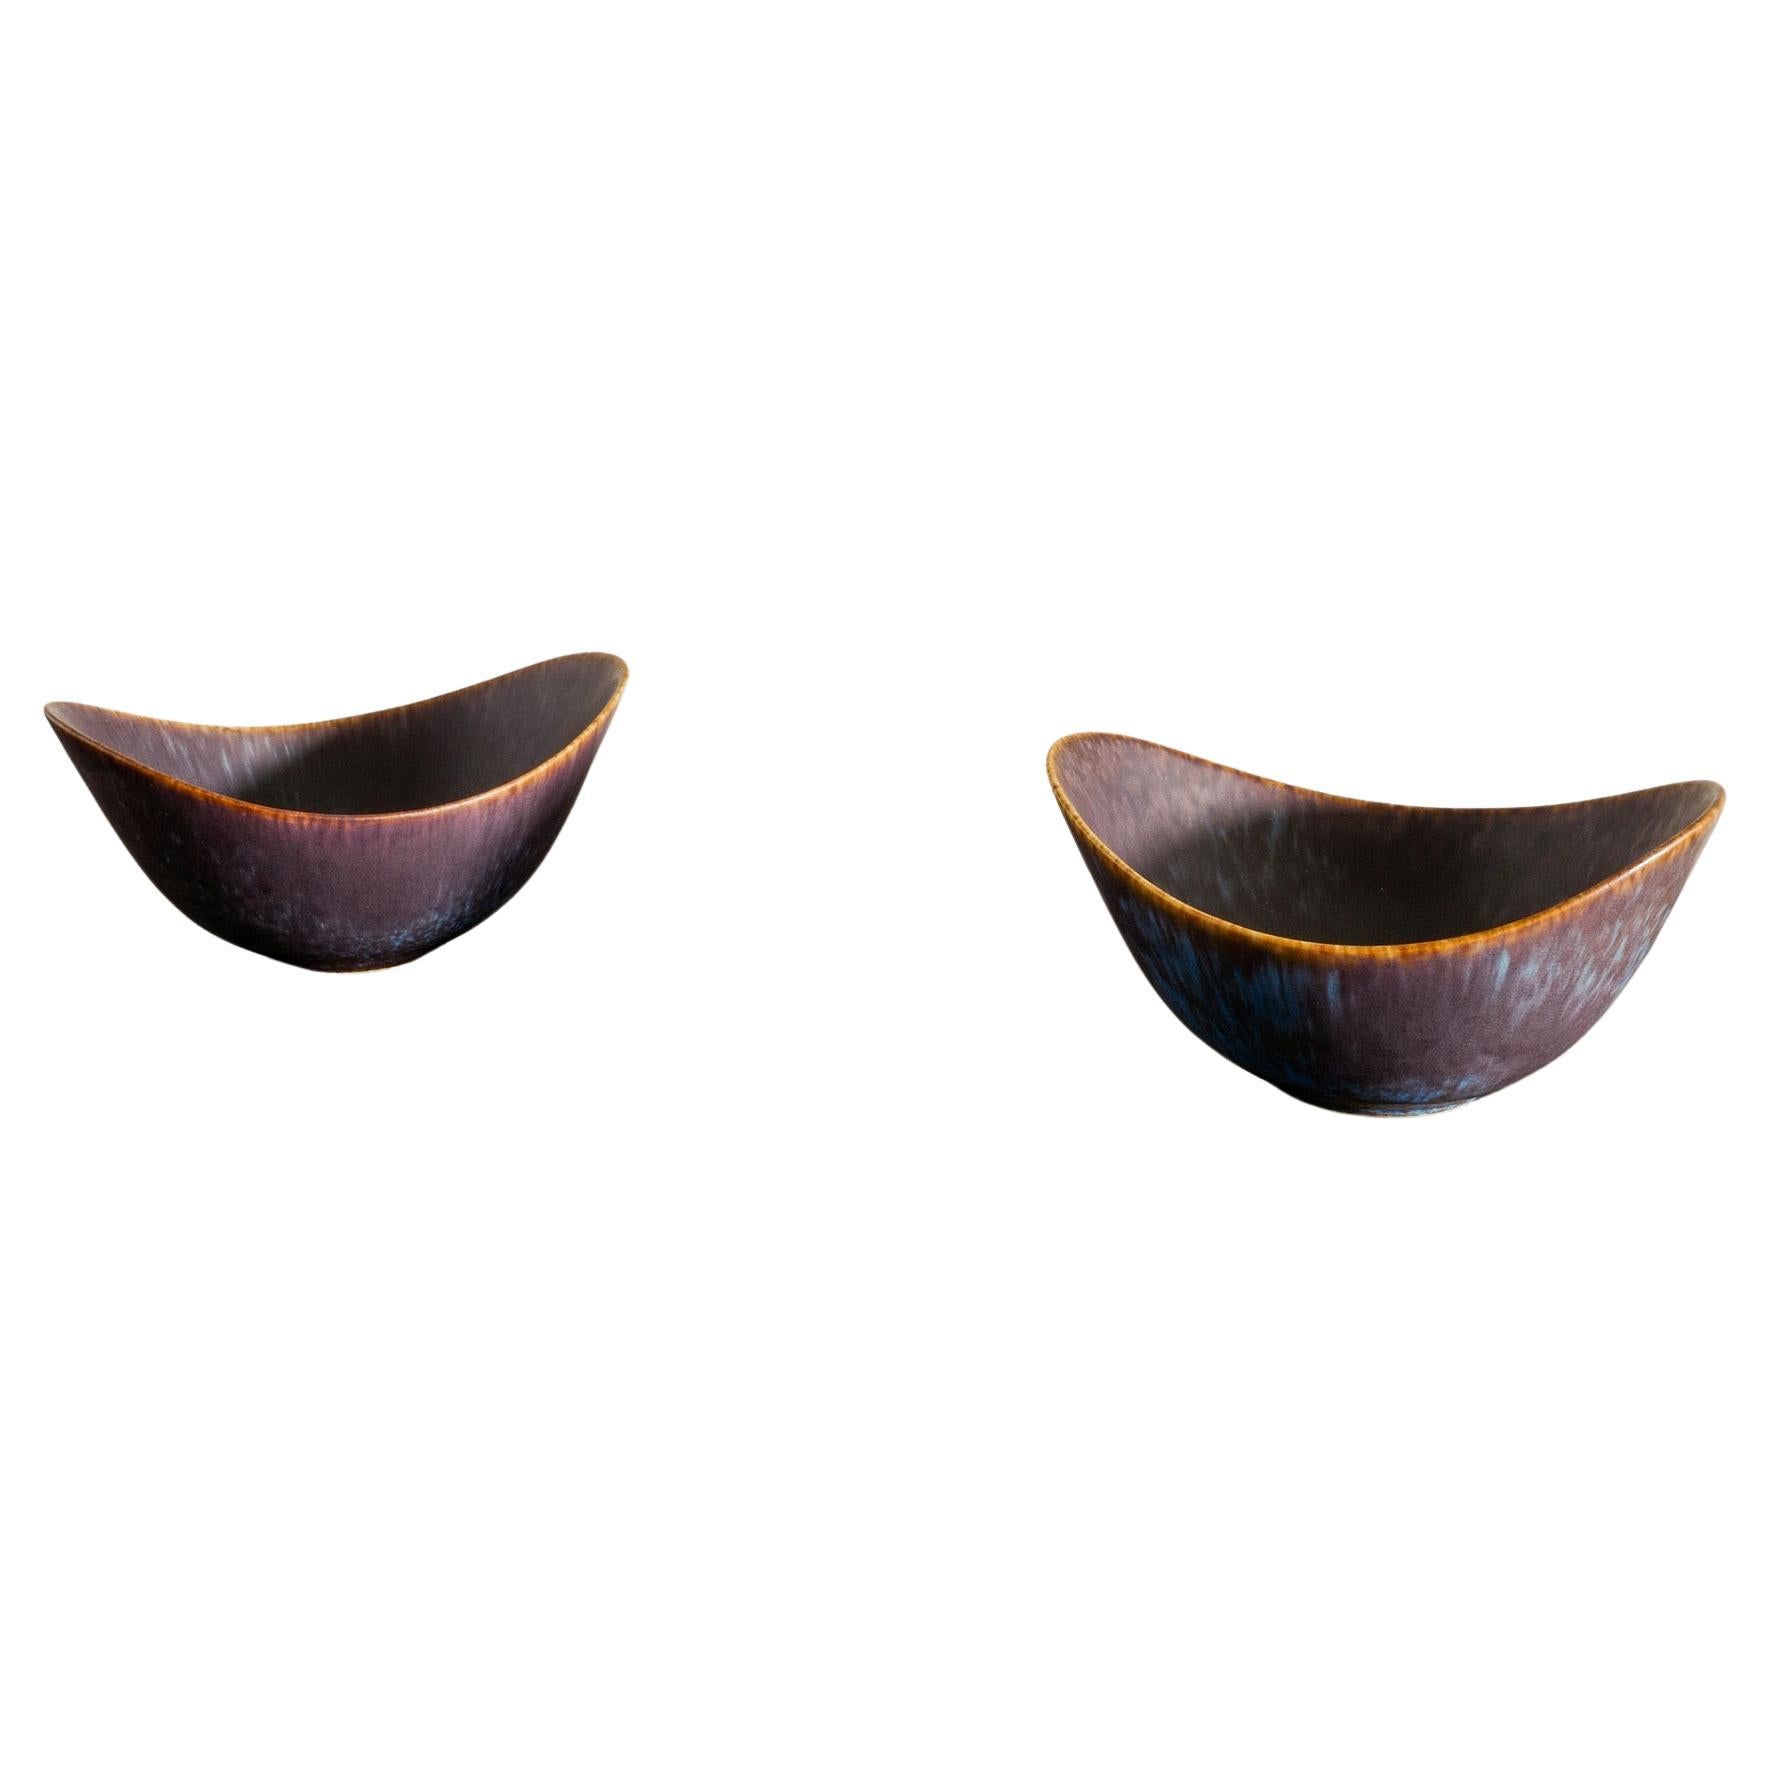 Pair of Mid Century Ceramic Bowls by Gunnar Nylund for Rörstrand Sweden, 1950s For Sale